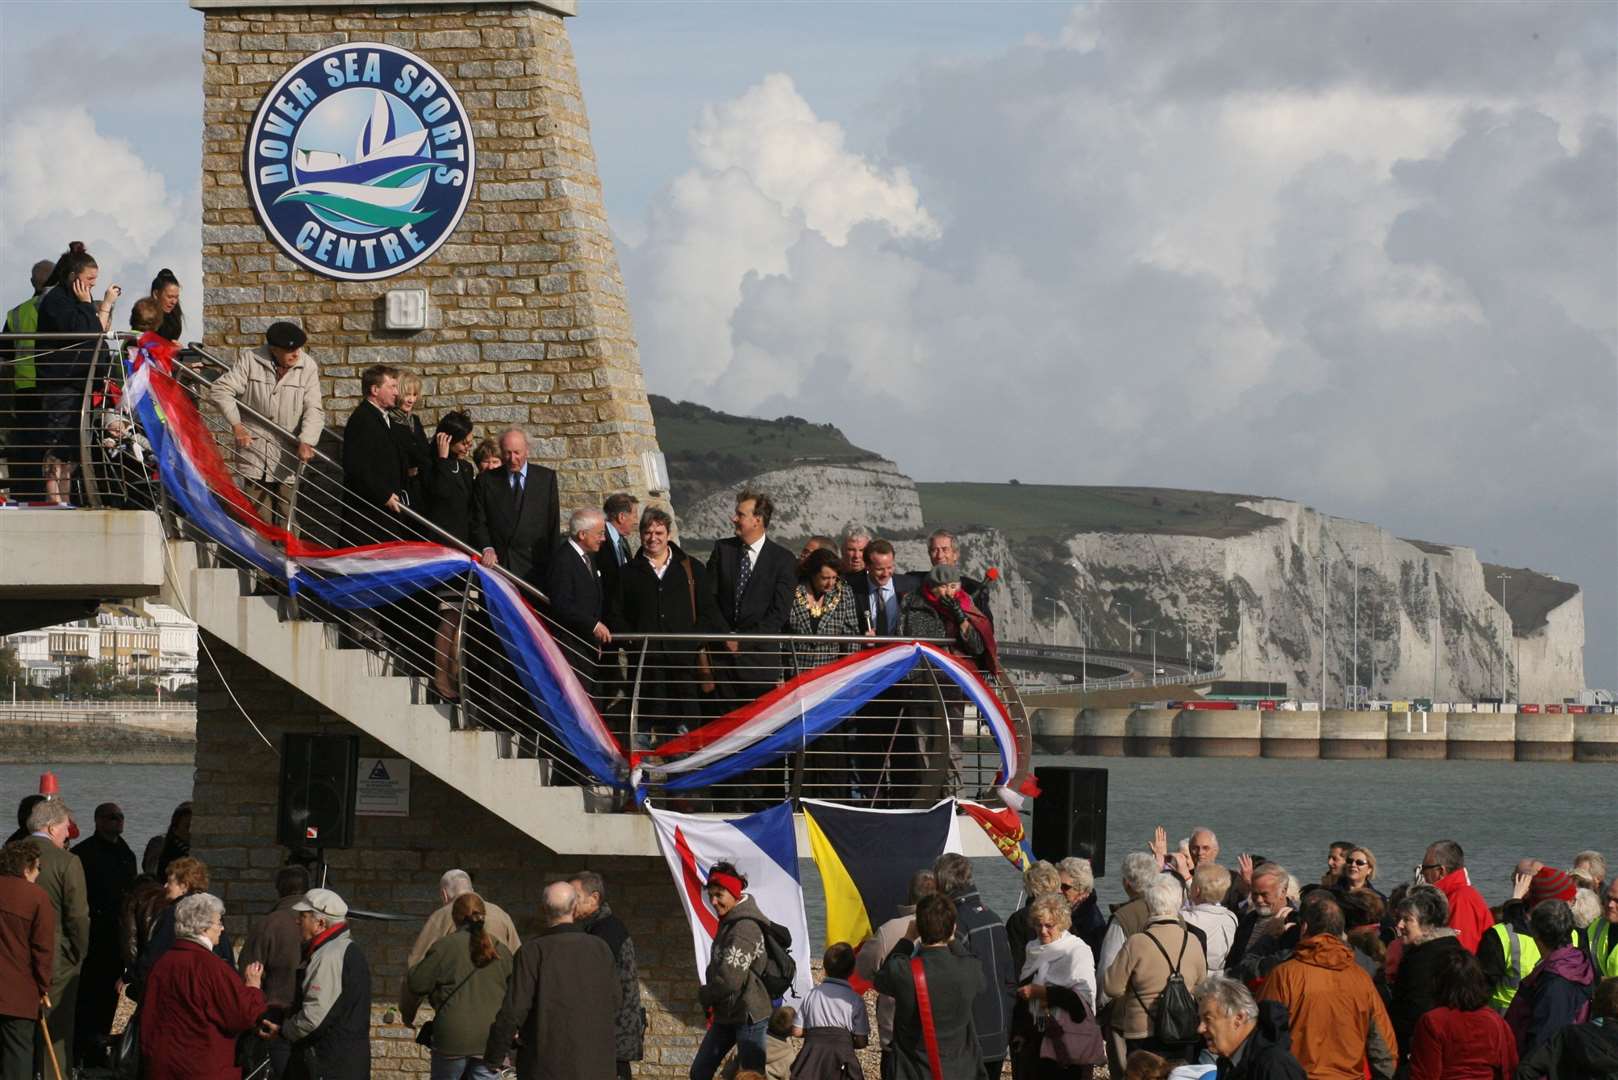 Huge crowds gathered to welcome the Forces' Sweetheart at the event in Dover in 2010 Picture: Terry Scott